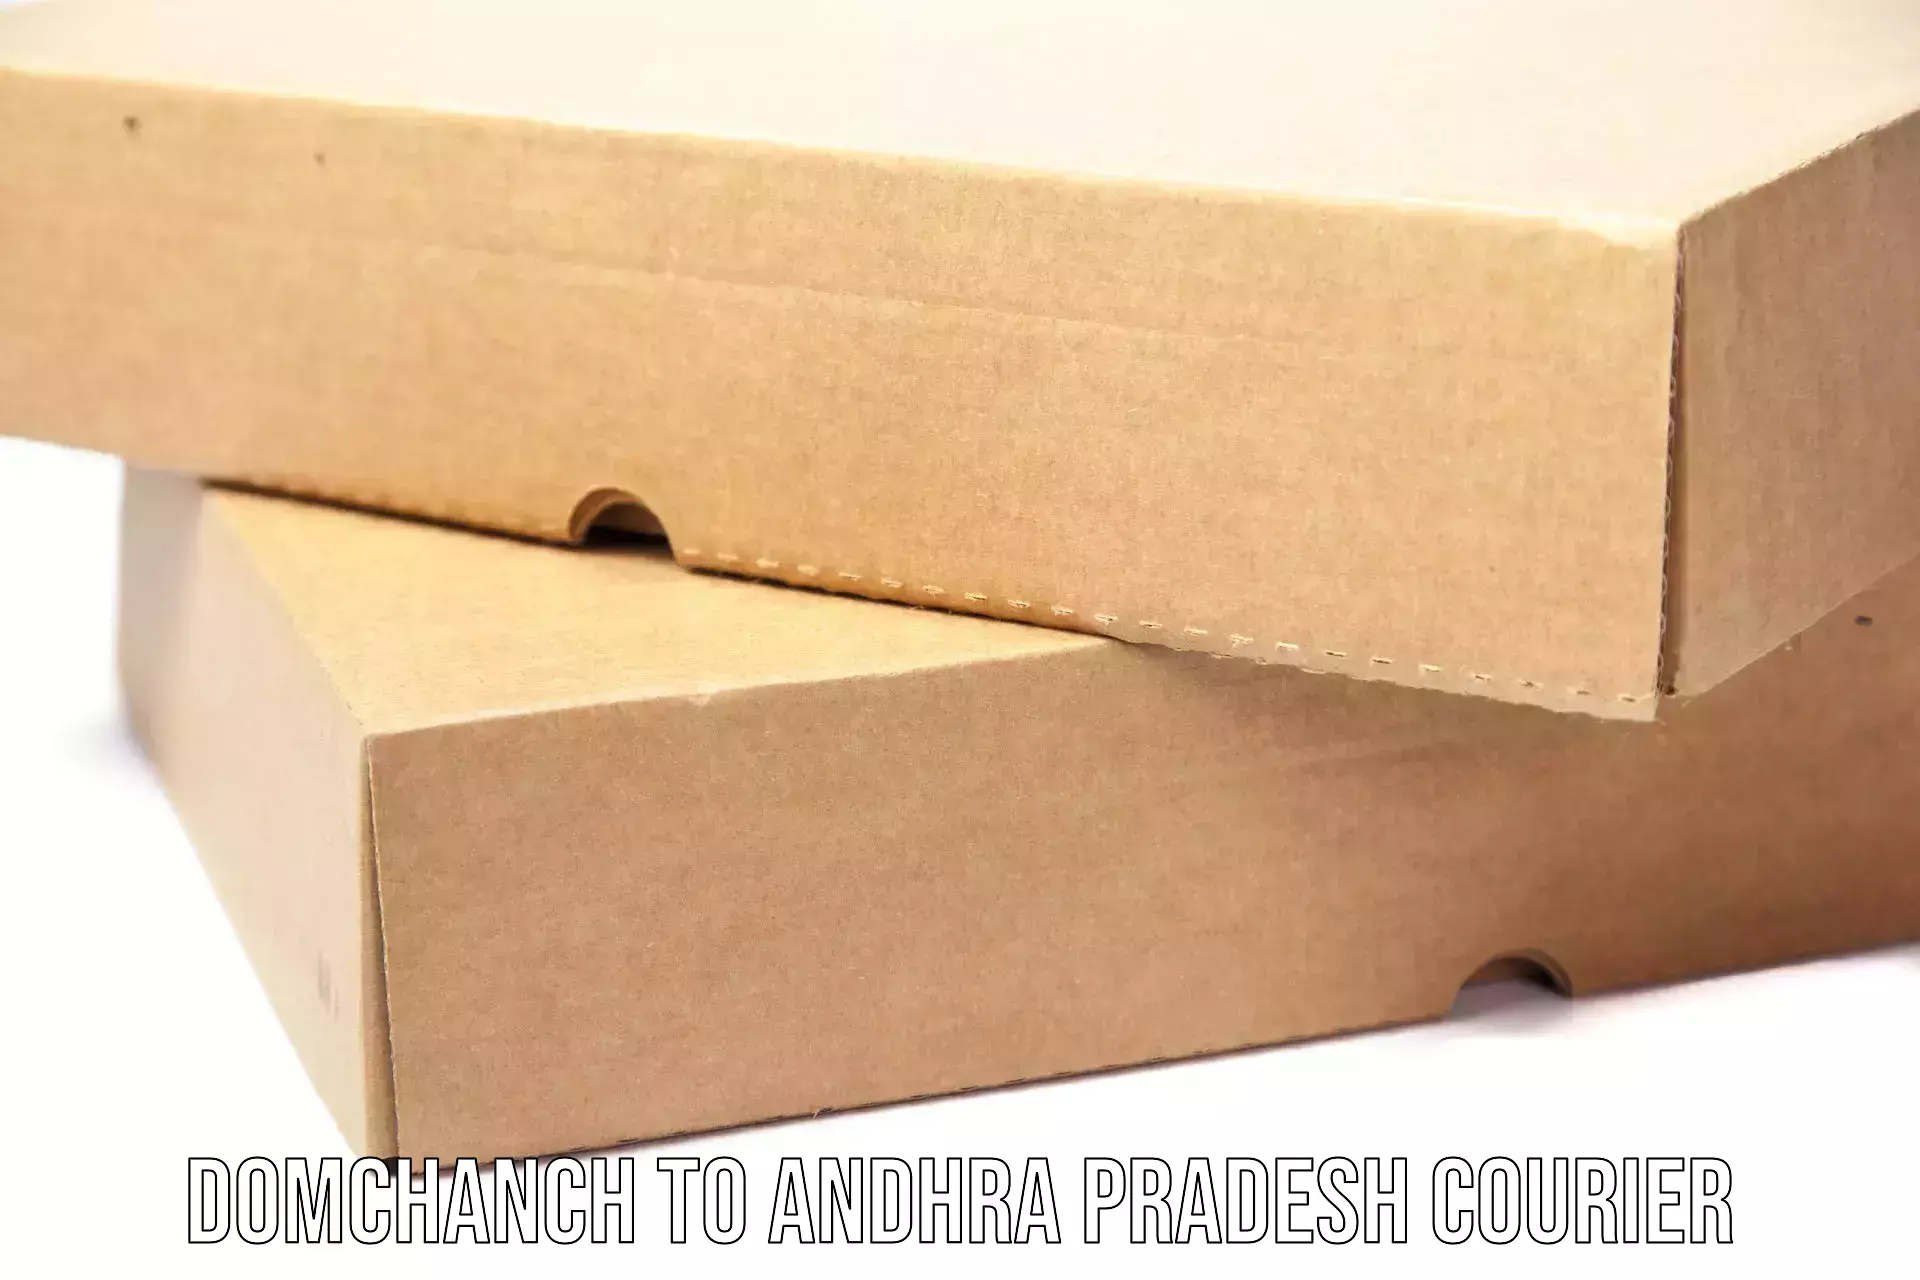 Reliable courier service Domchanch to Pulivendula